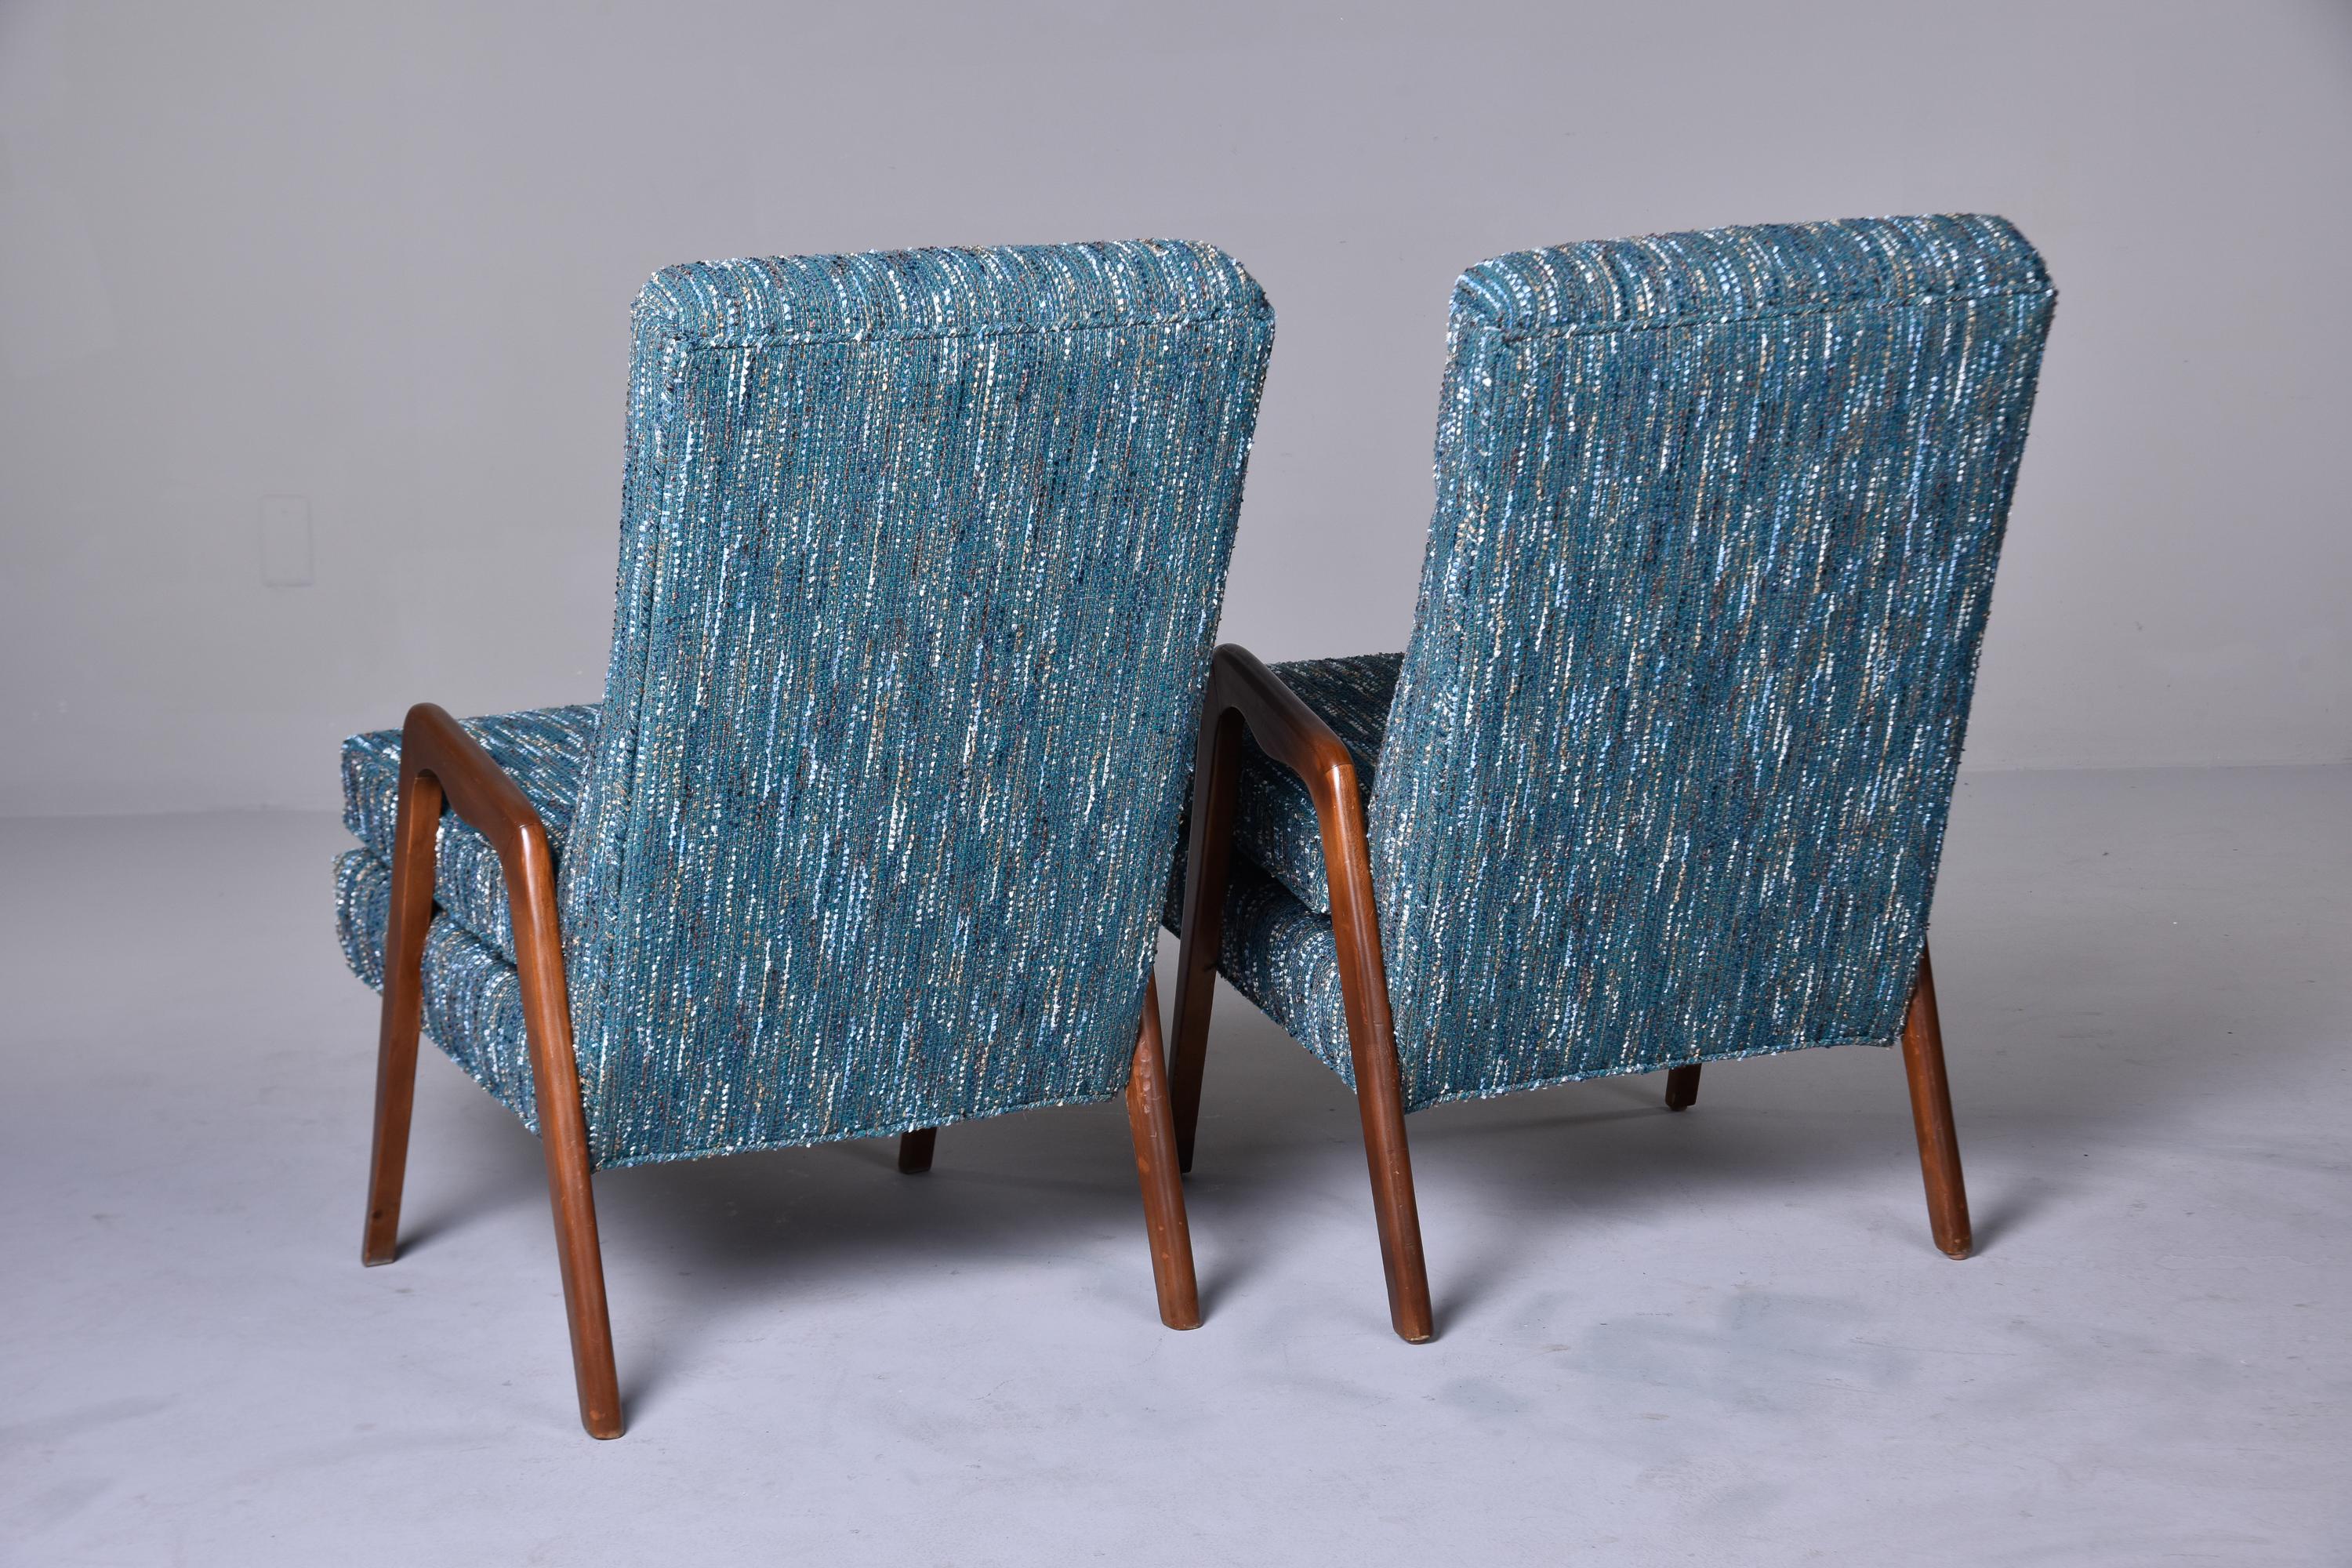 Pair of Mid-Century Italian Chairs with New Teal Tweed Upholstery For Sale 2